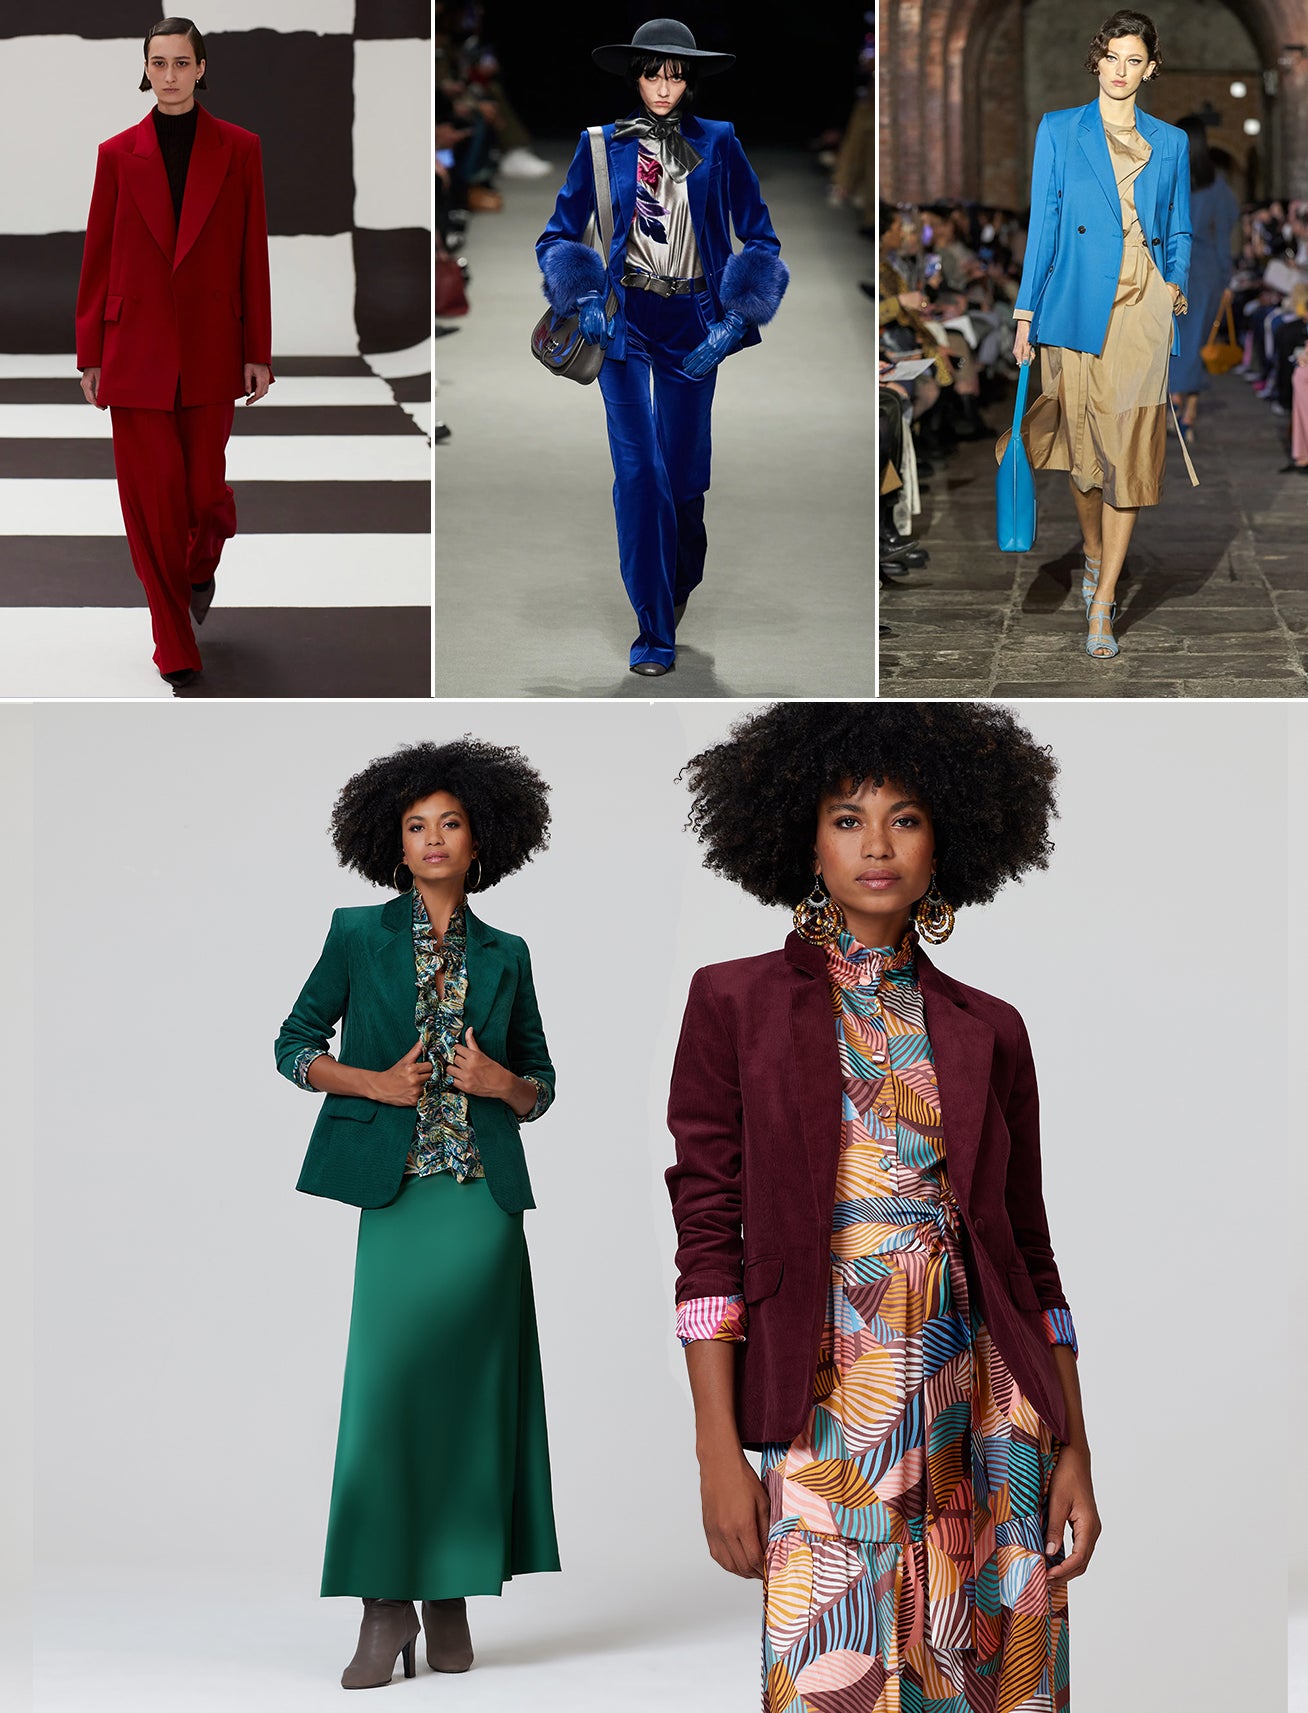 ridleylondon-autumn-trends-2022-bright-tailoring-and-velvet-blazers-with-printed-floral-maxi-skirts-and-dresses